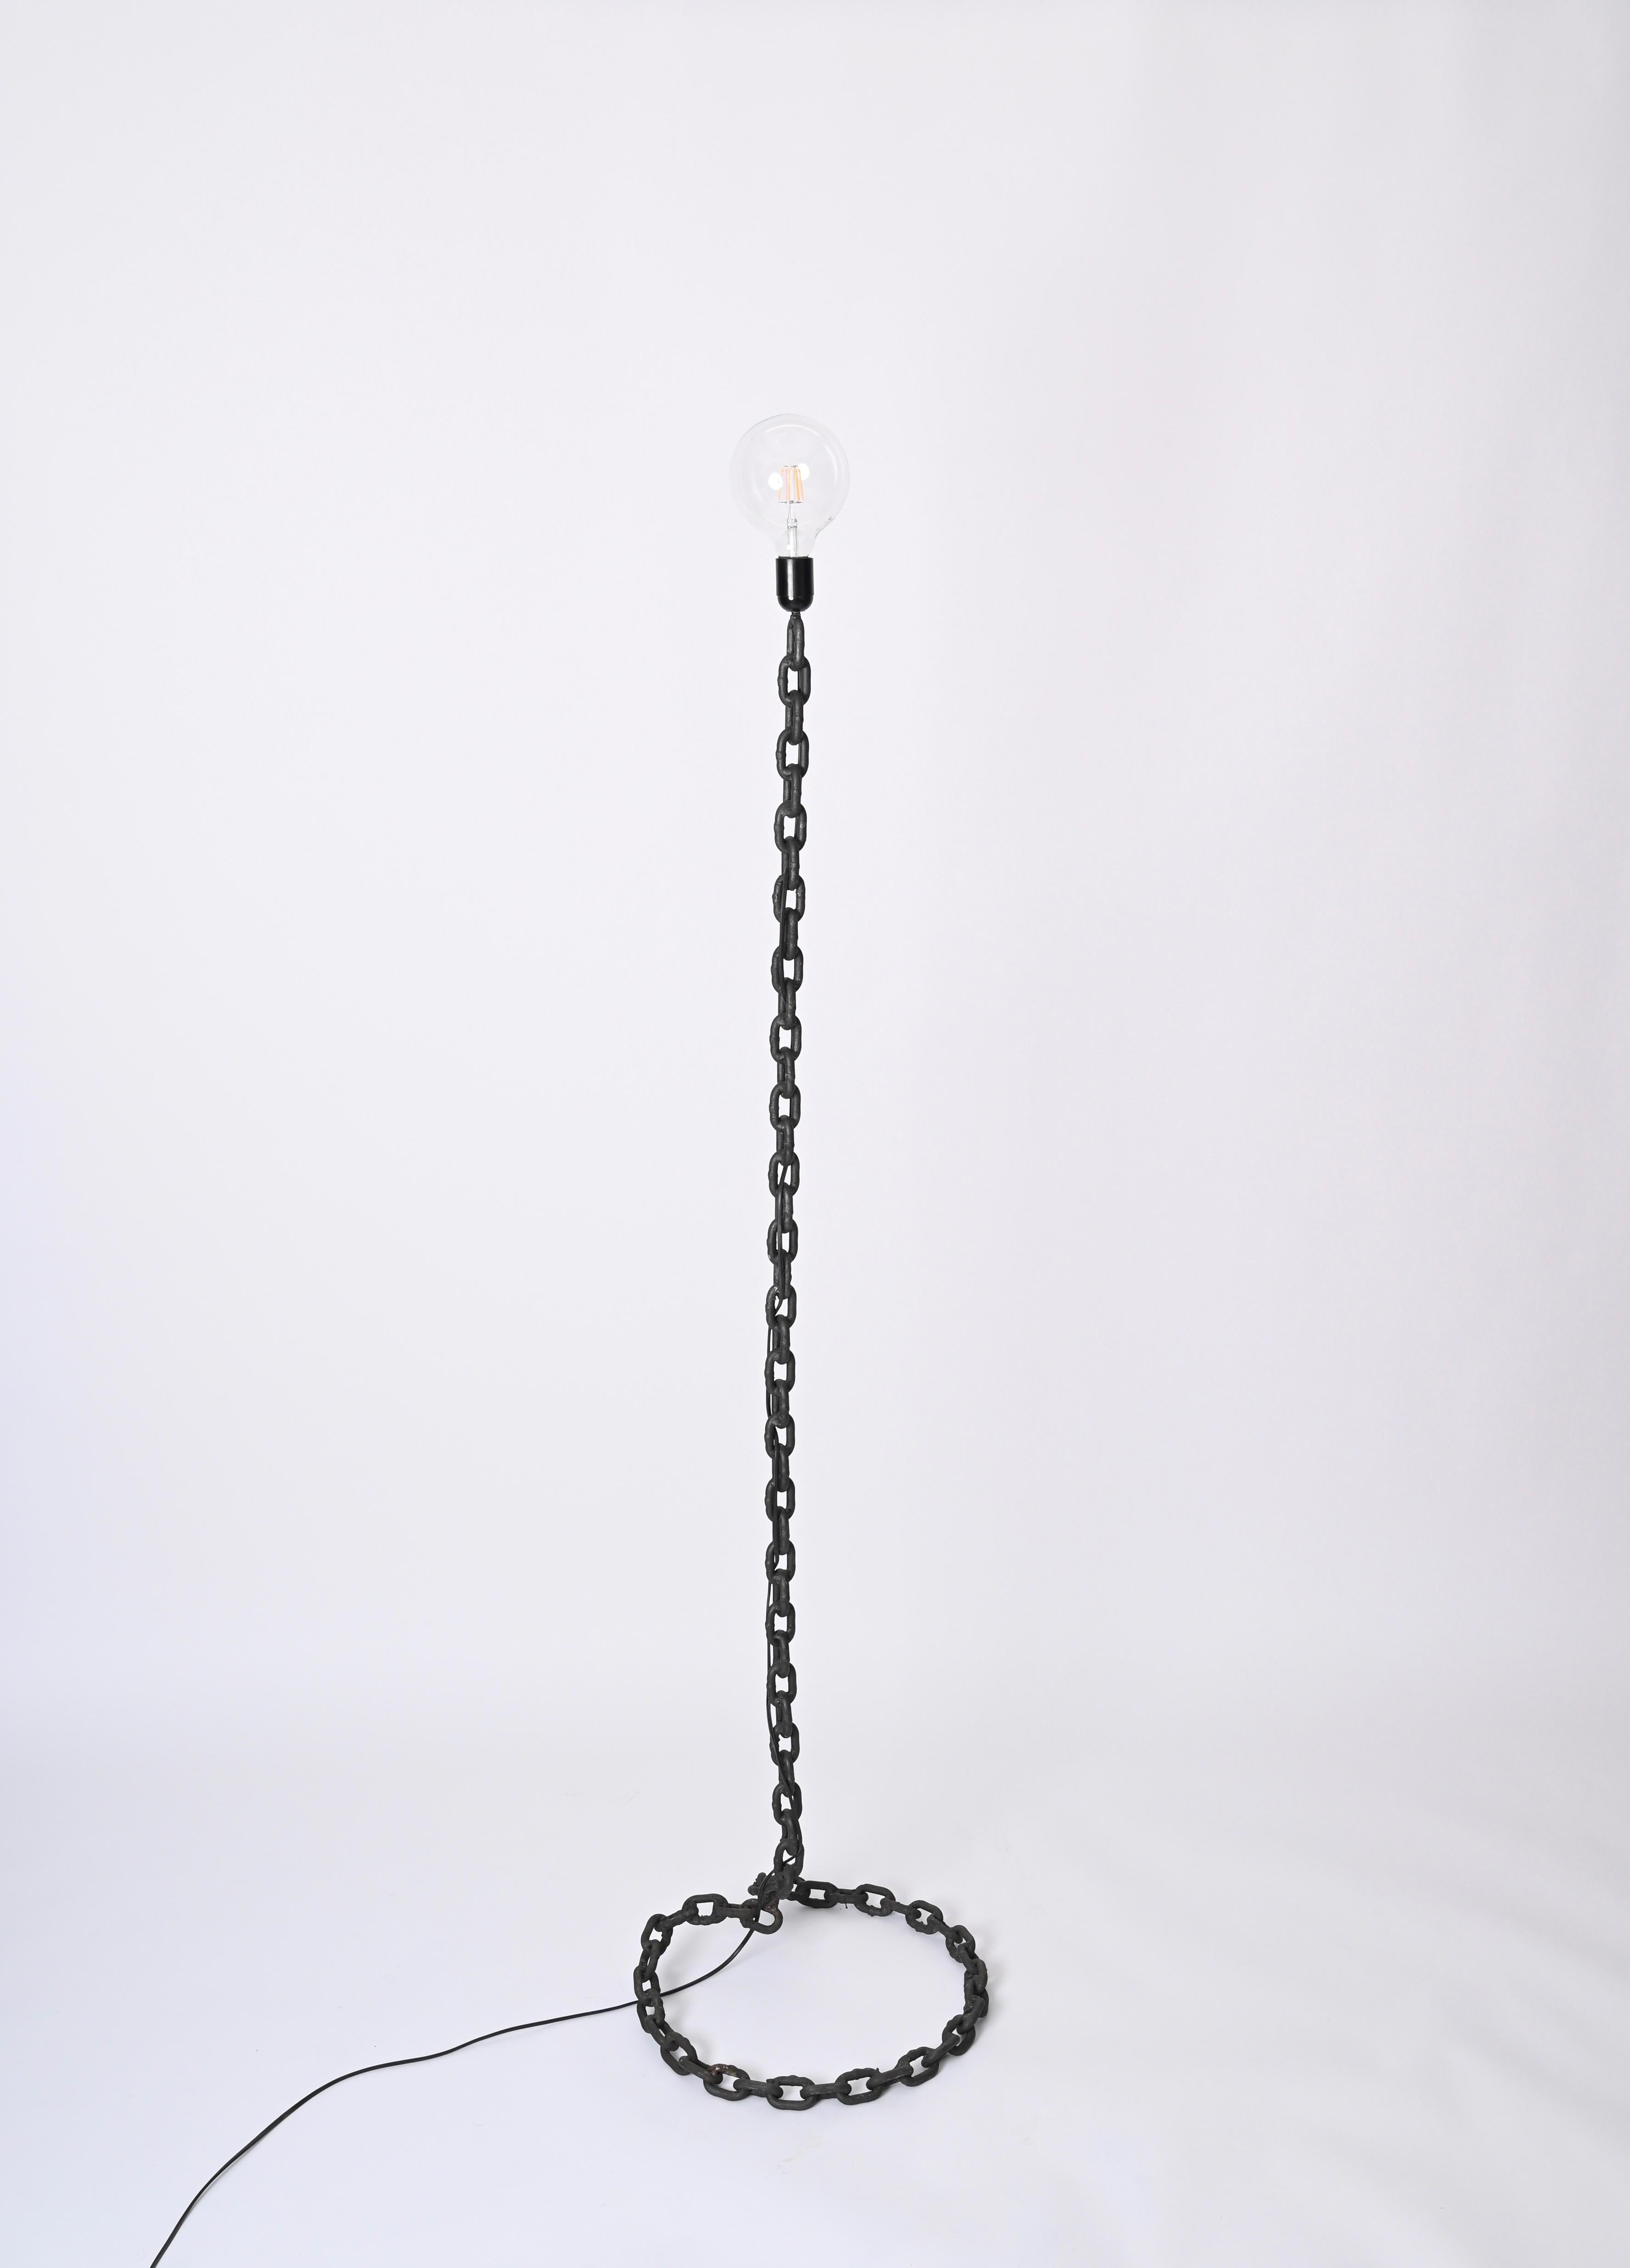 Franz West Brutalist Midcentury Chain Floor Lamp, Italy 1970s  For Sale 8